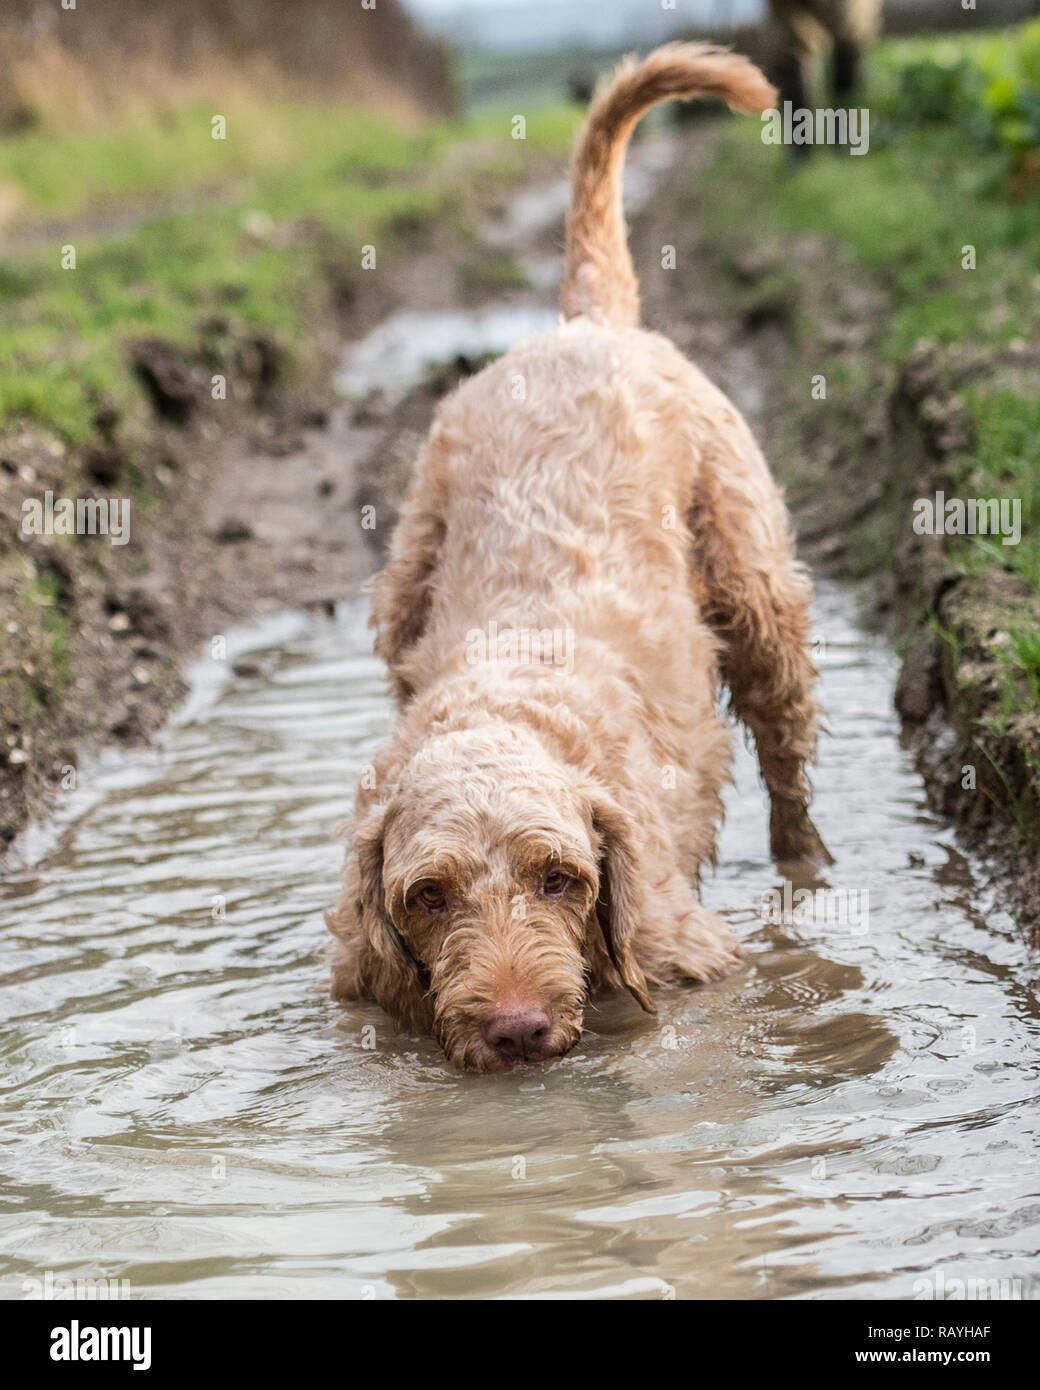 hungarian wirehaired vizsla dog playing and drinking in water Stock Photo